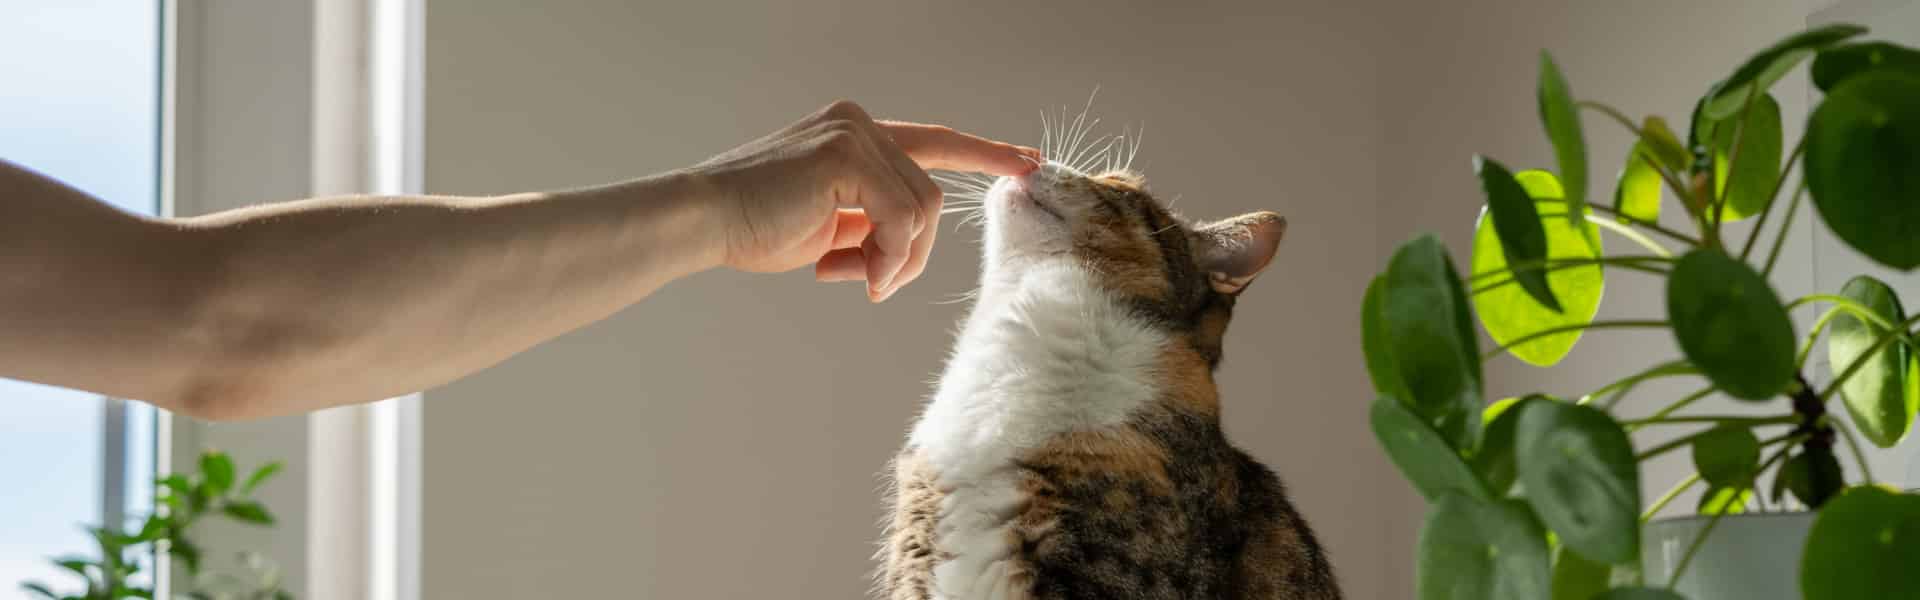 A woman touching a cat on the nose as cat leans into the touch